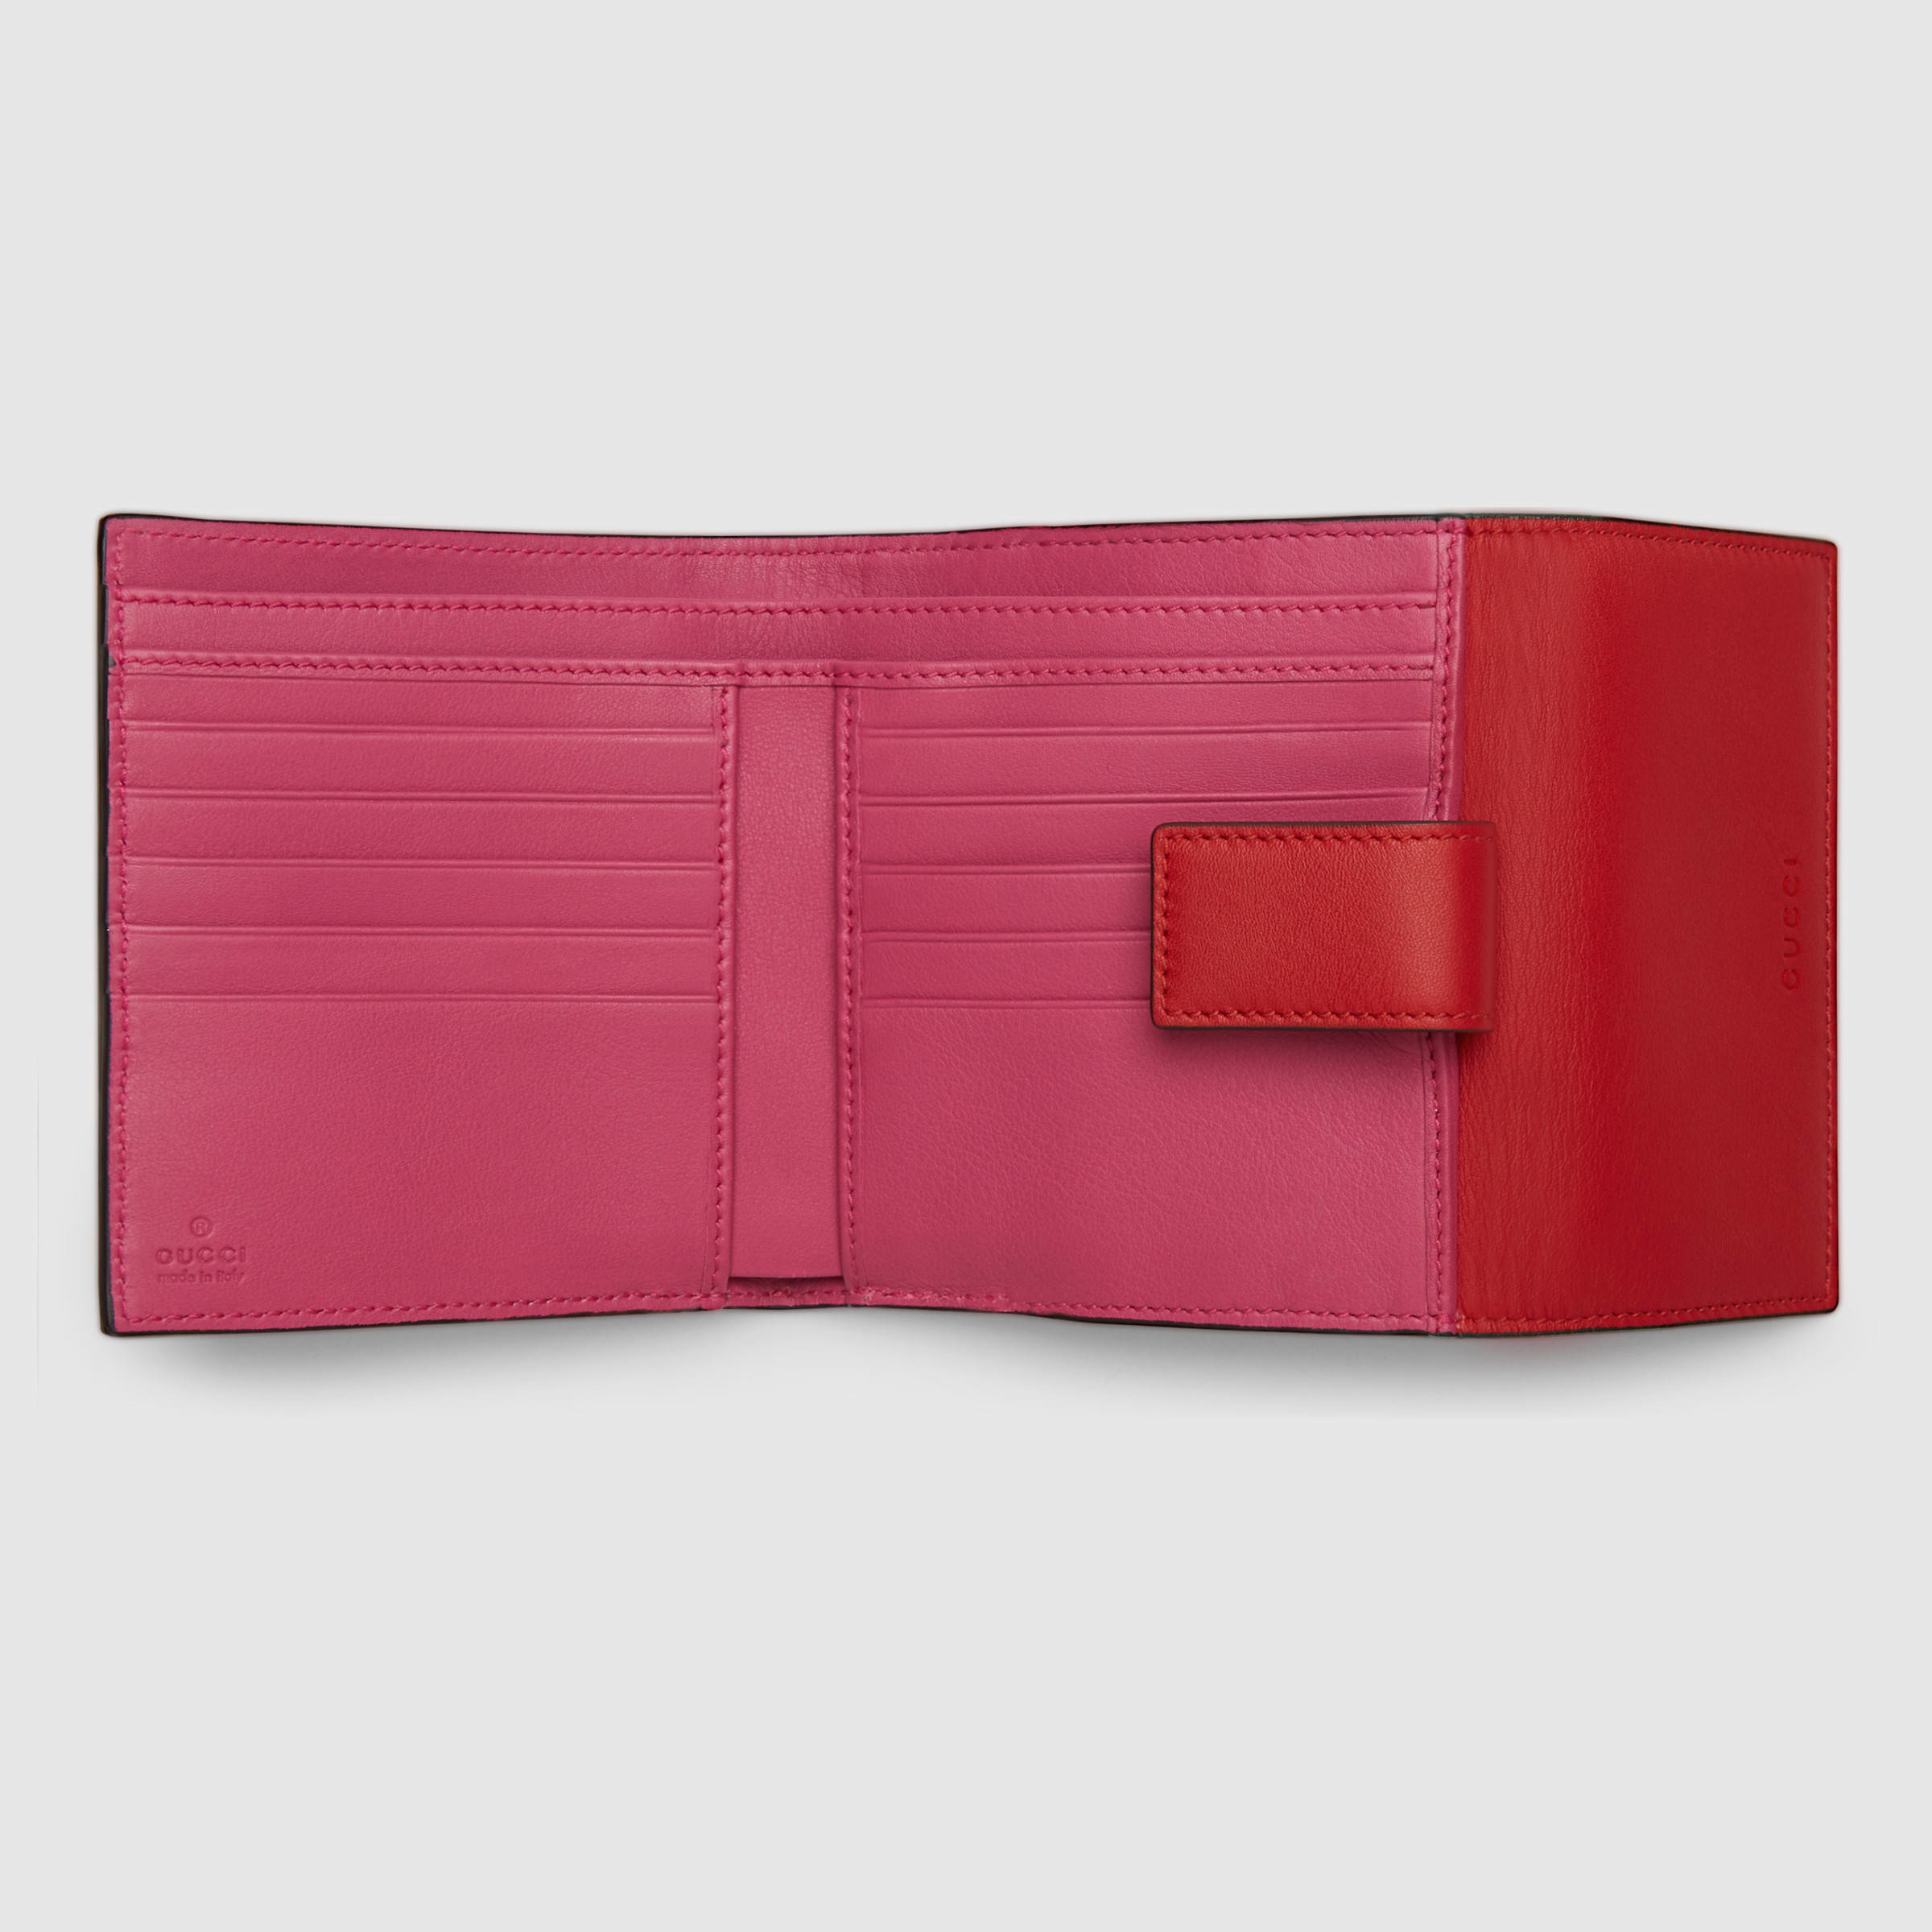 Gucci Canvas Gg Supreme French Flap Wallet in Red - Lyst